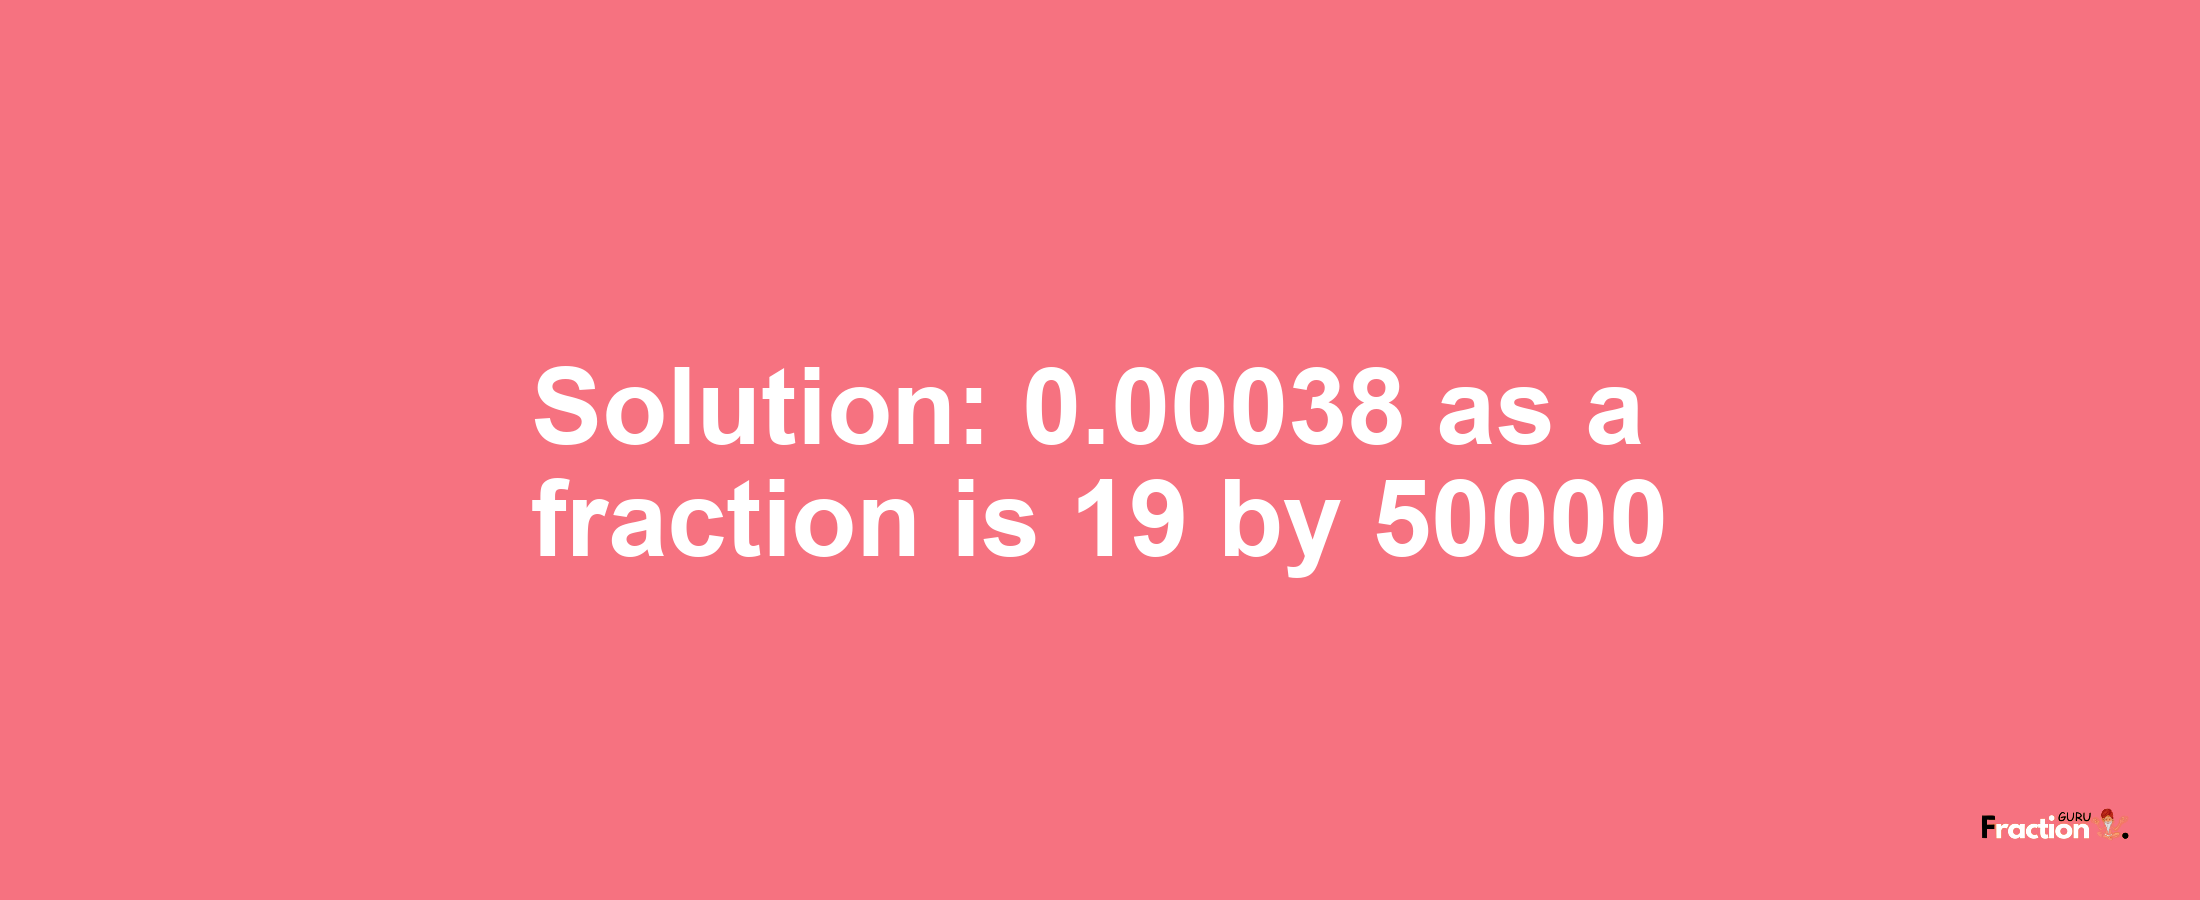 Solution:0.00038 as a fraction is 19/50000